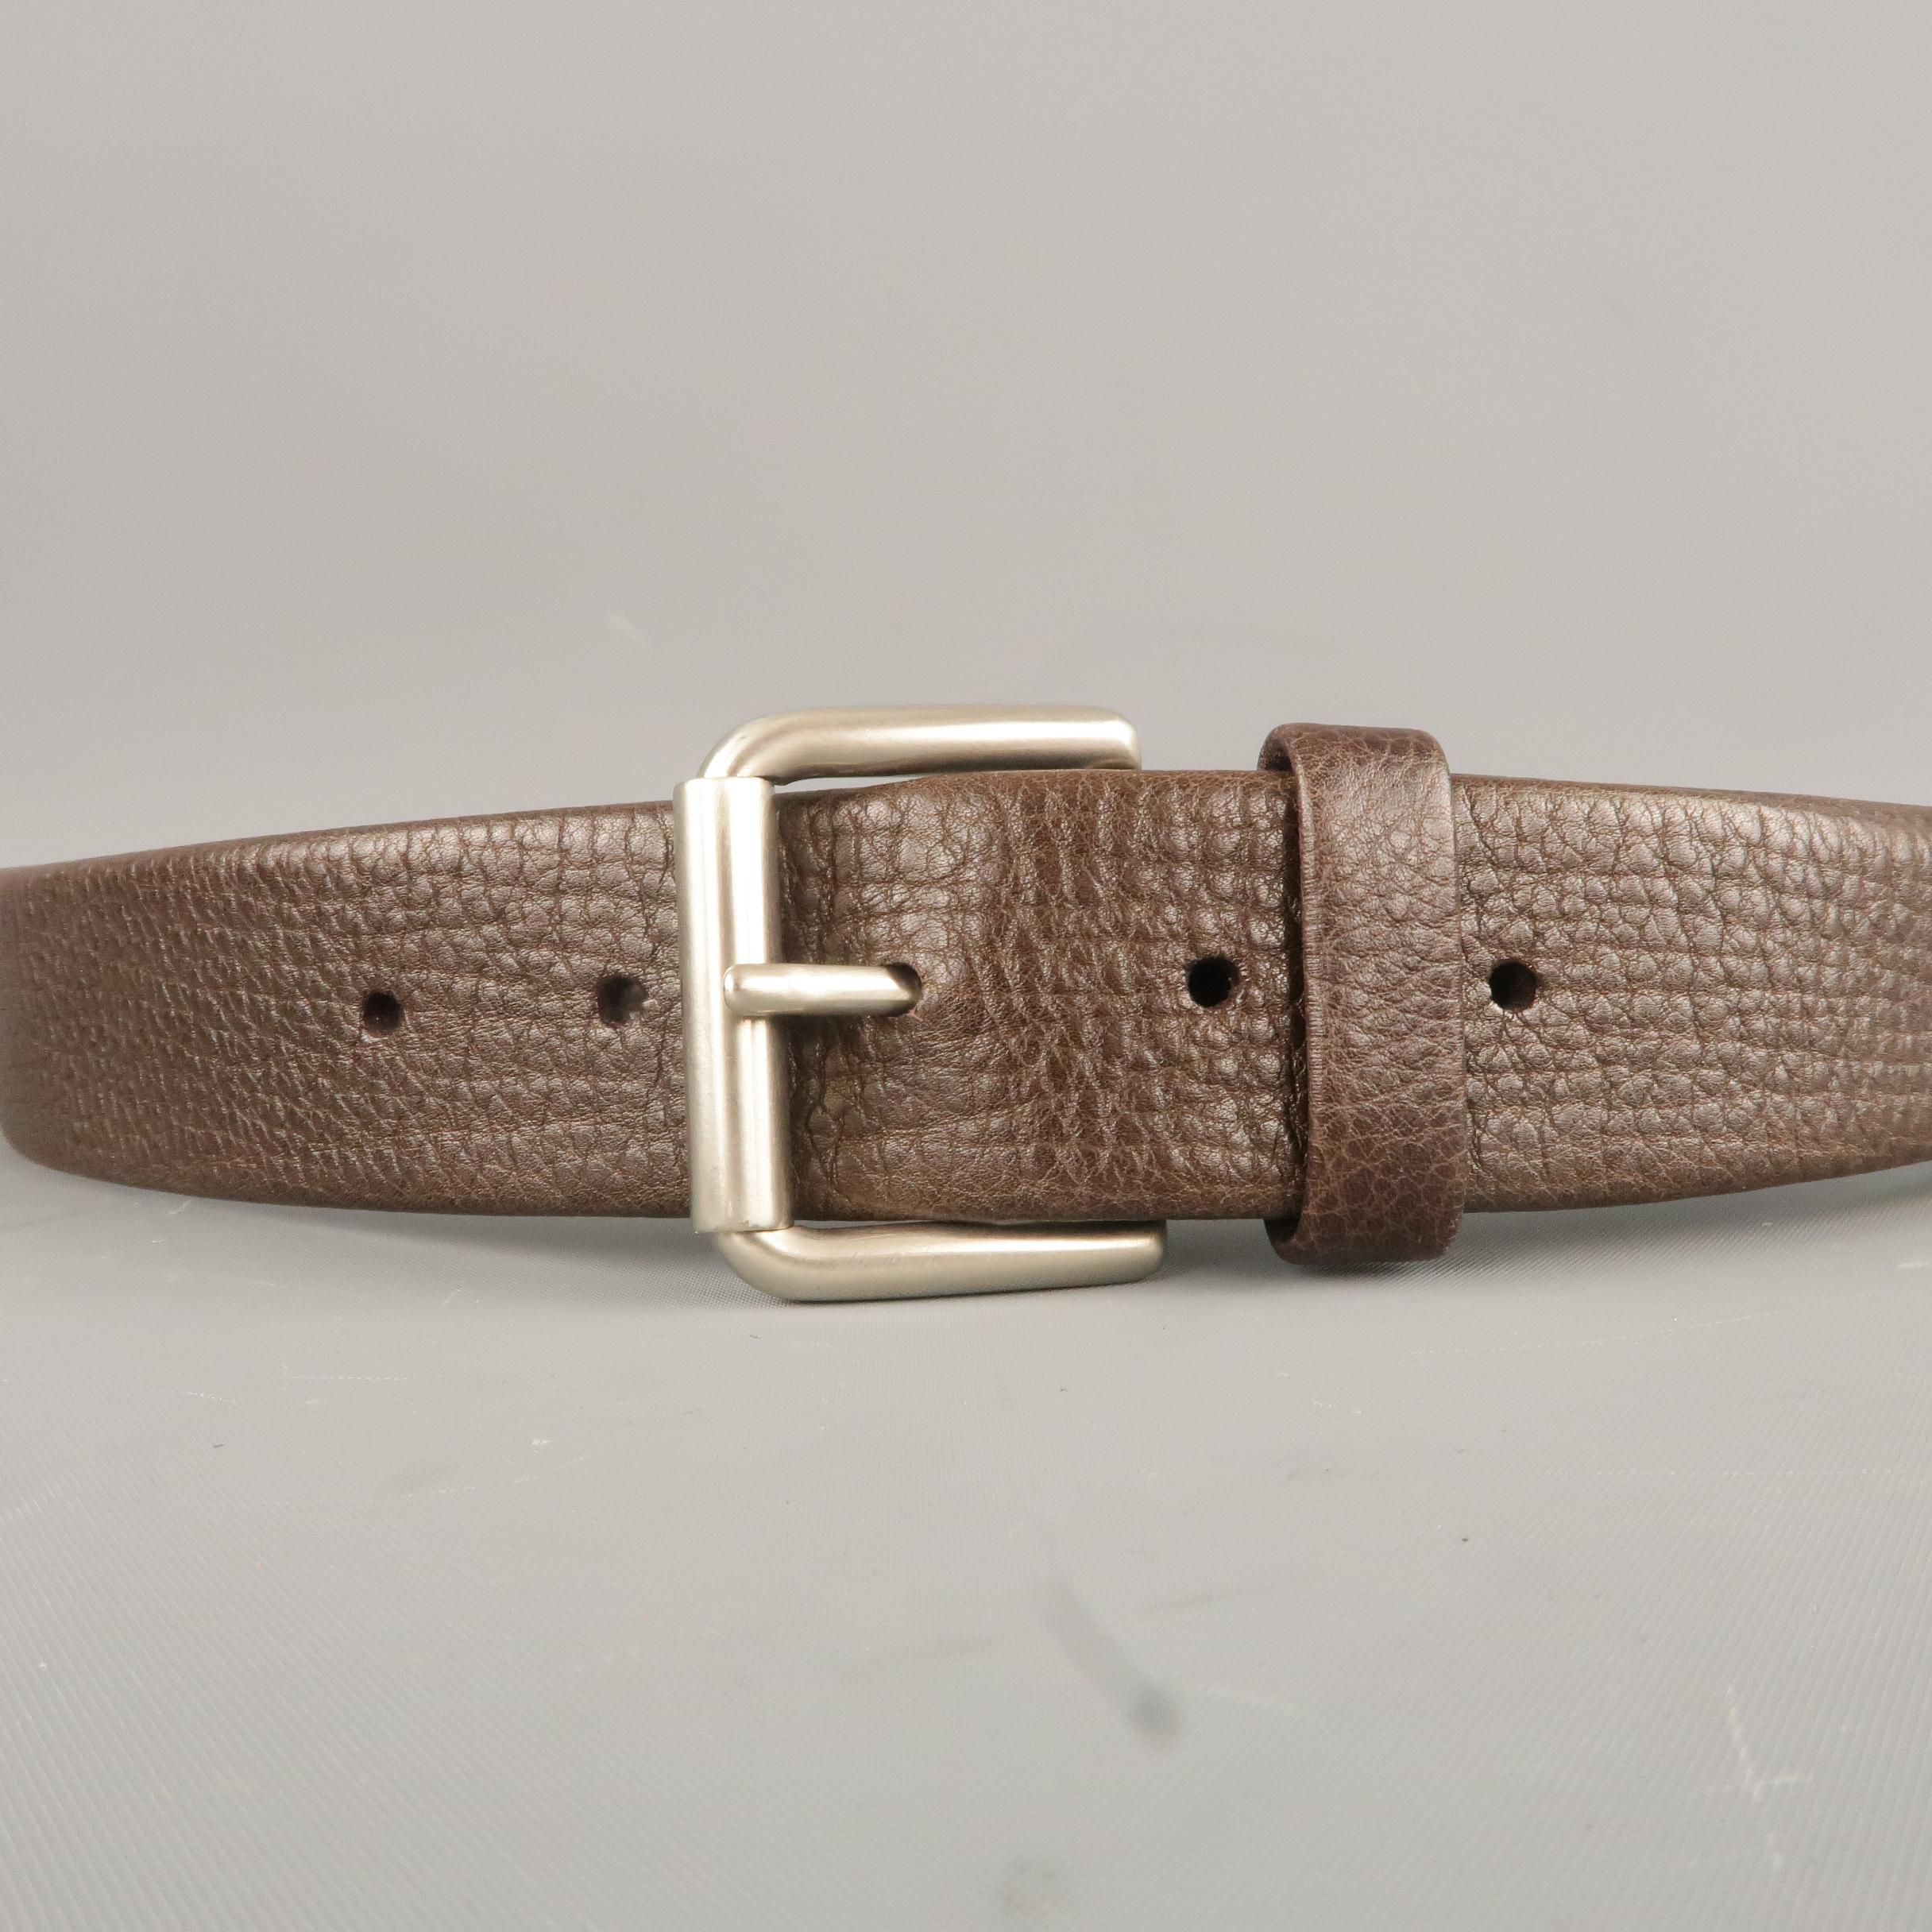 LONGHI belt features a dark taupe brown soft textured leather strap with silver tone square buckle. Made in Italy.
 
Excellent Pre-Owned Condition.
Marked: 36
 
Length: 42.5 in.
Width: 1.25 in.
Fits: 33.5-37.5 in.